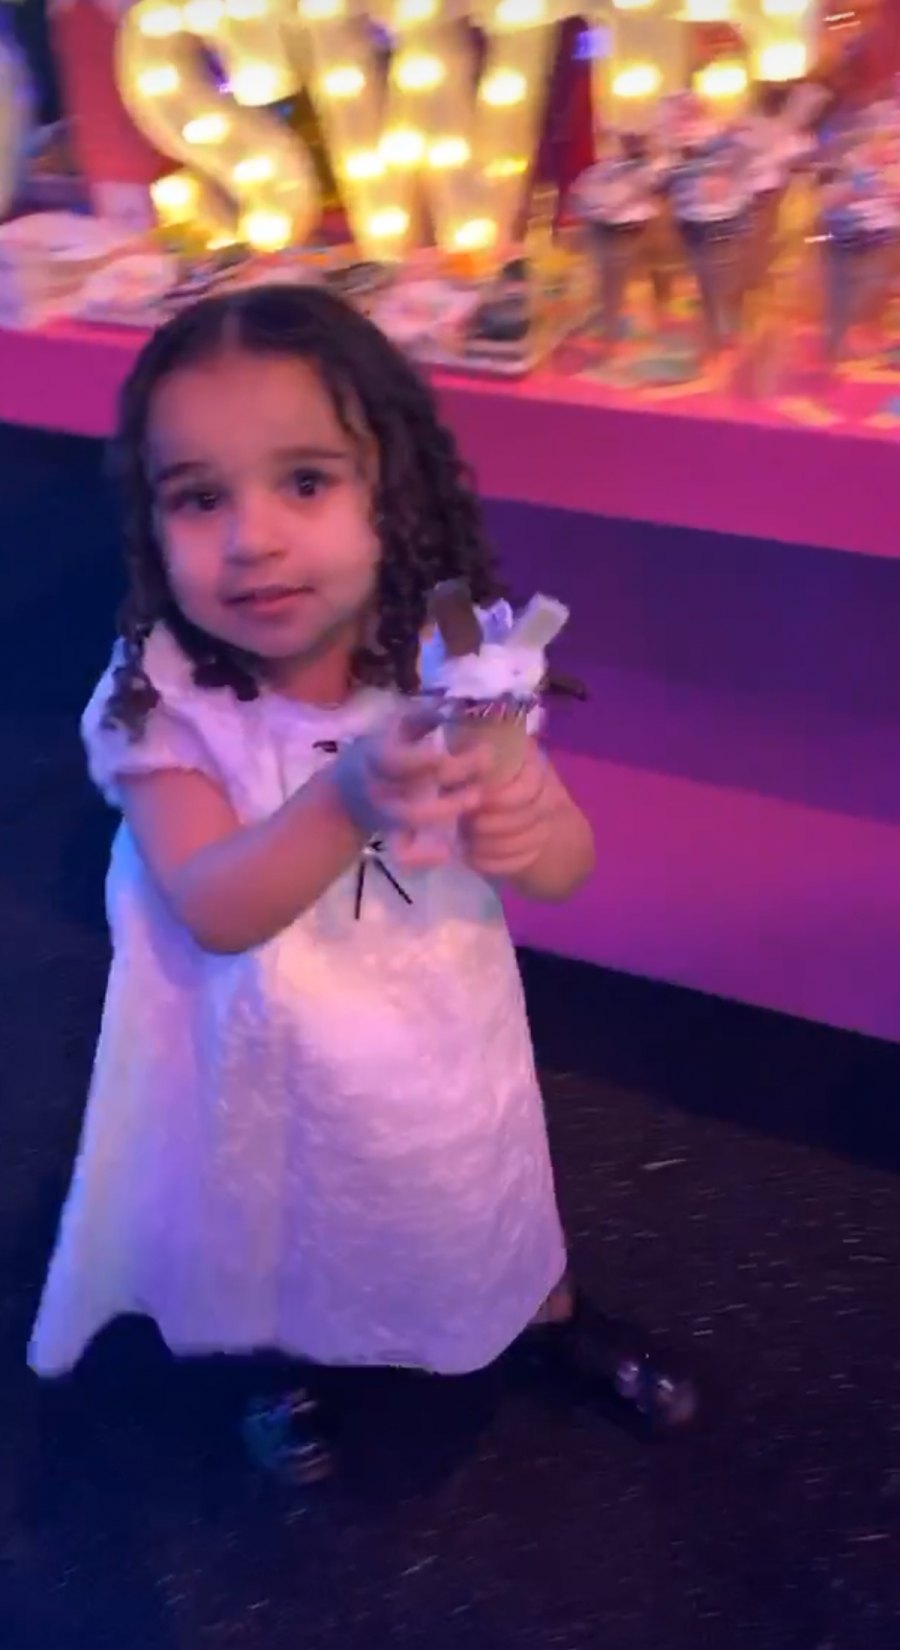 Inside Kylie Jenner’s Stormiworld-Themed 2nd Birthday Party for Daughter Stormi